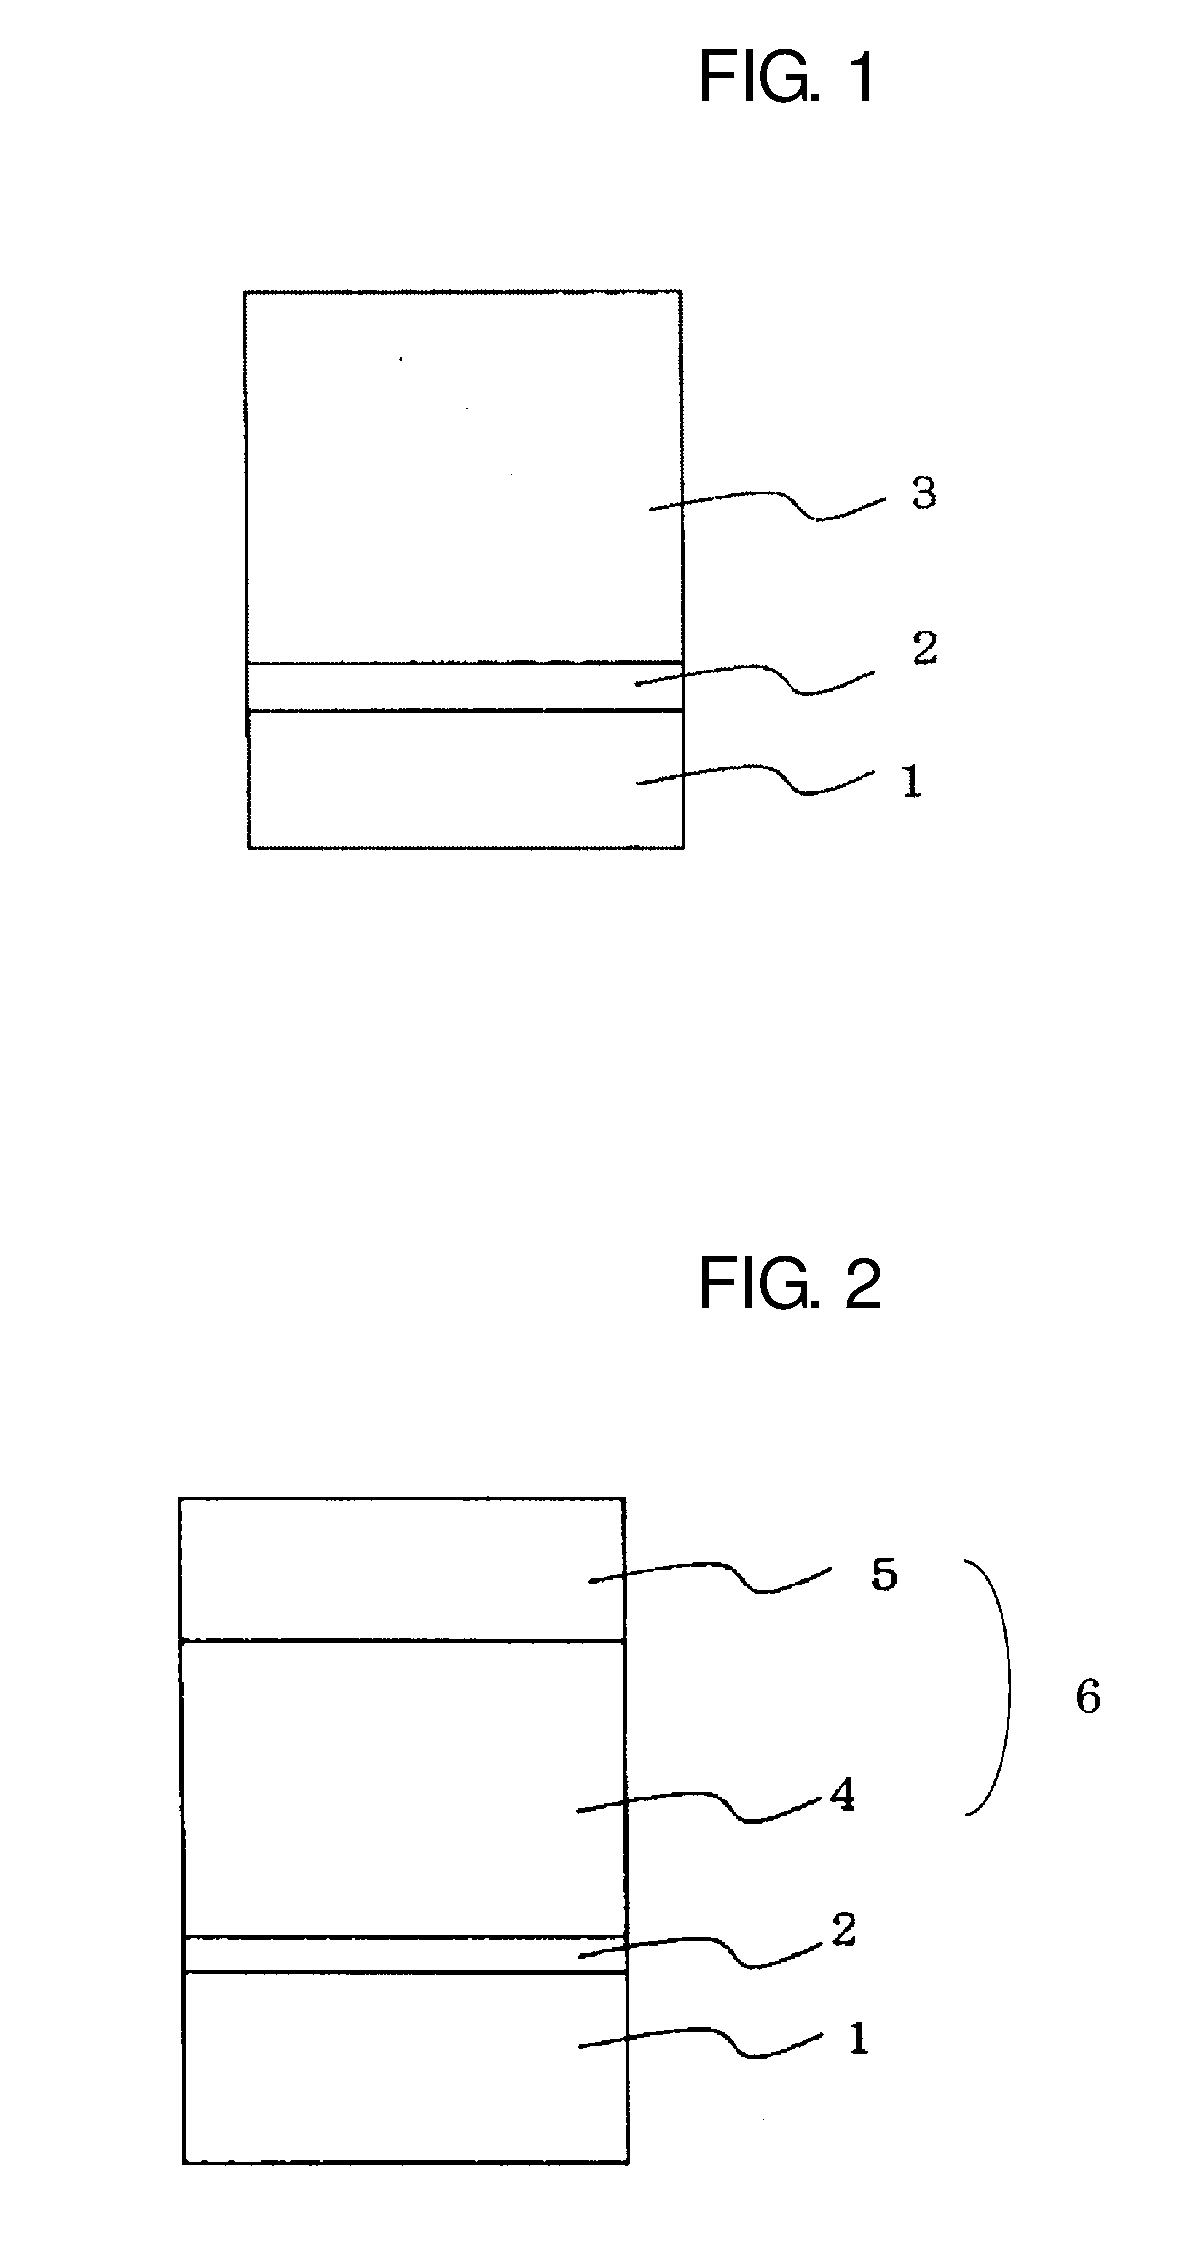 Photosensitive body for electrophotography, method for producing same and electrophotographic apparatus